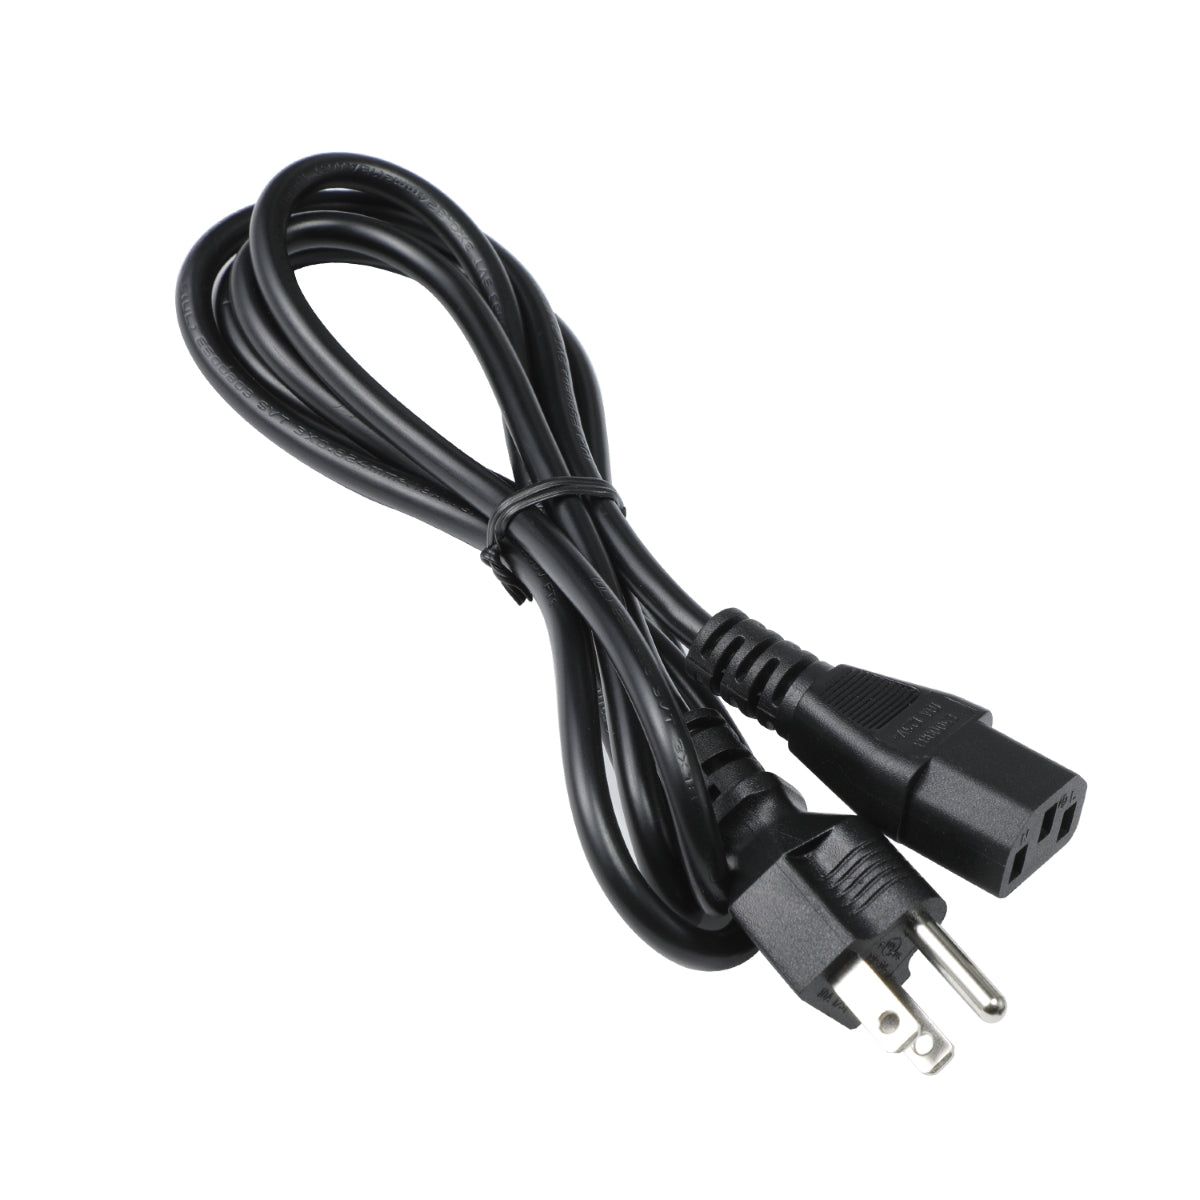 Power Cord for Samsung LS27A700NWNXZA Monitor TV.